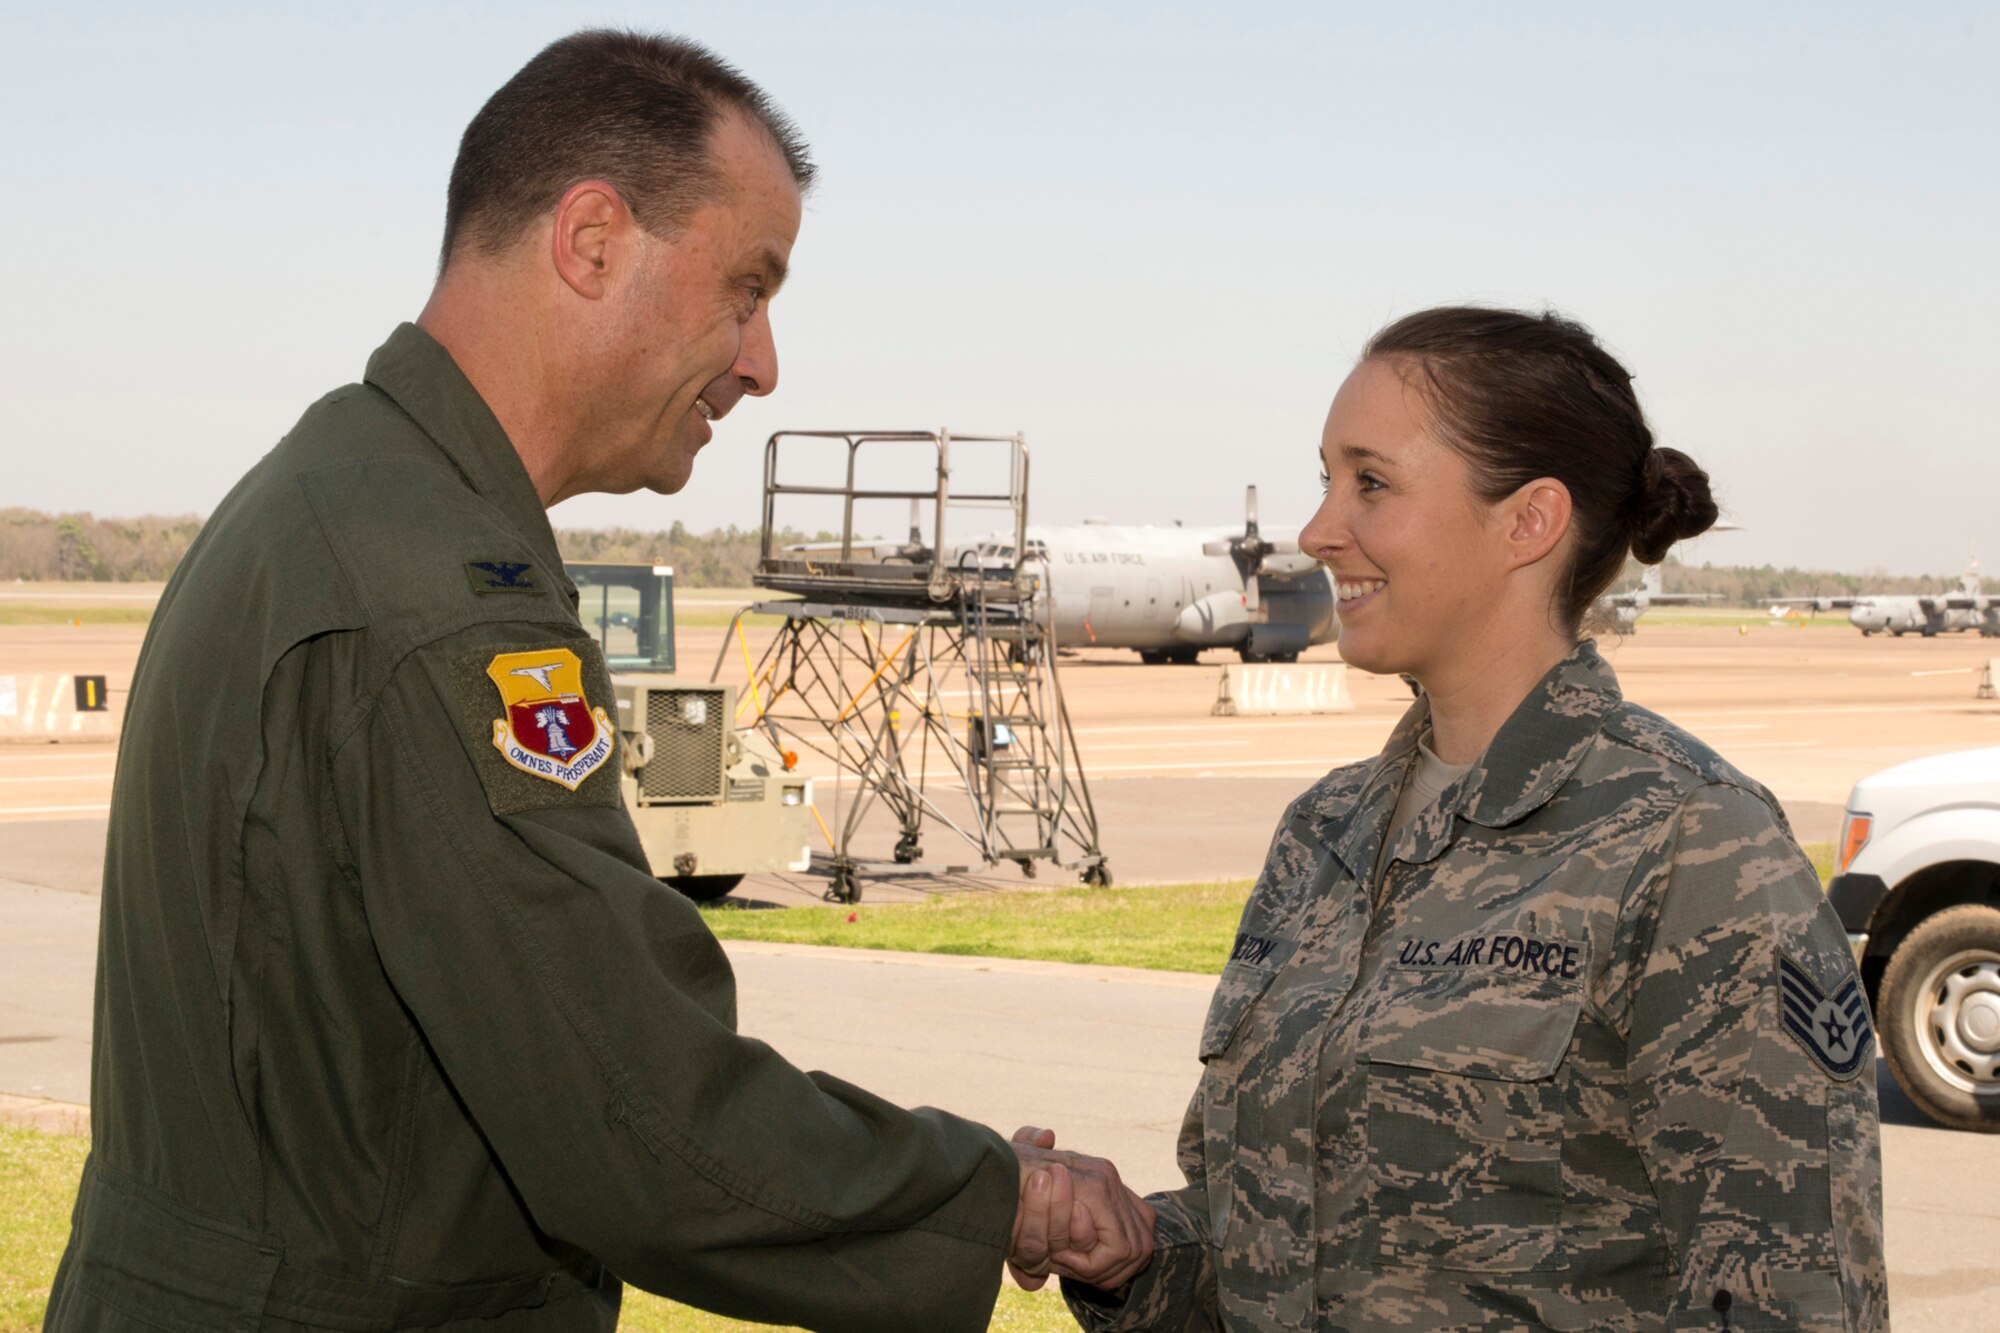 U.S. Air Force Reserve Col. Craig Drescher, 913th Airlift Group commander, congratulates Staff Sgt. Tamara Hamilton, a 913th Maintenance Squadron crew chief, as the Combat Airlifter of the Week Mar. 15, 2016, at Little Rock Air Force Base, Ark. Hamilton saved the Air Force $12,000 by volunteering to build an engine trailer out of salvageable items. (U.S. Air Force photo by Master Sgt. Jeff Walston/Released)  